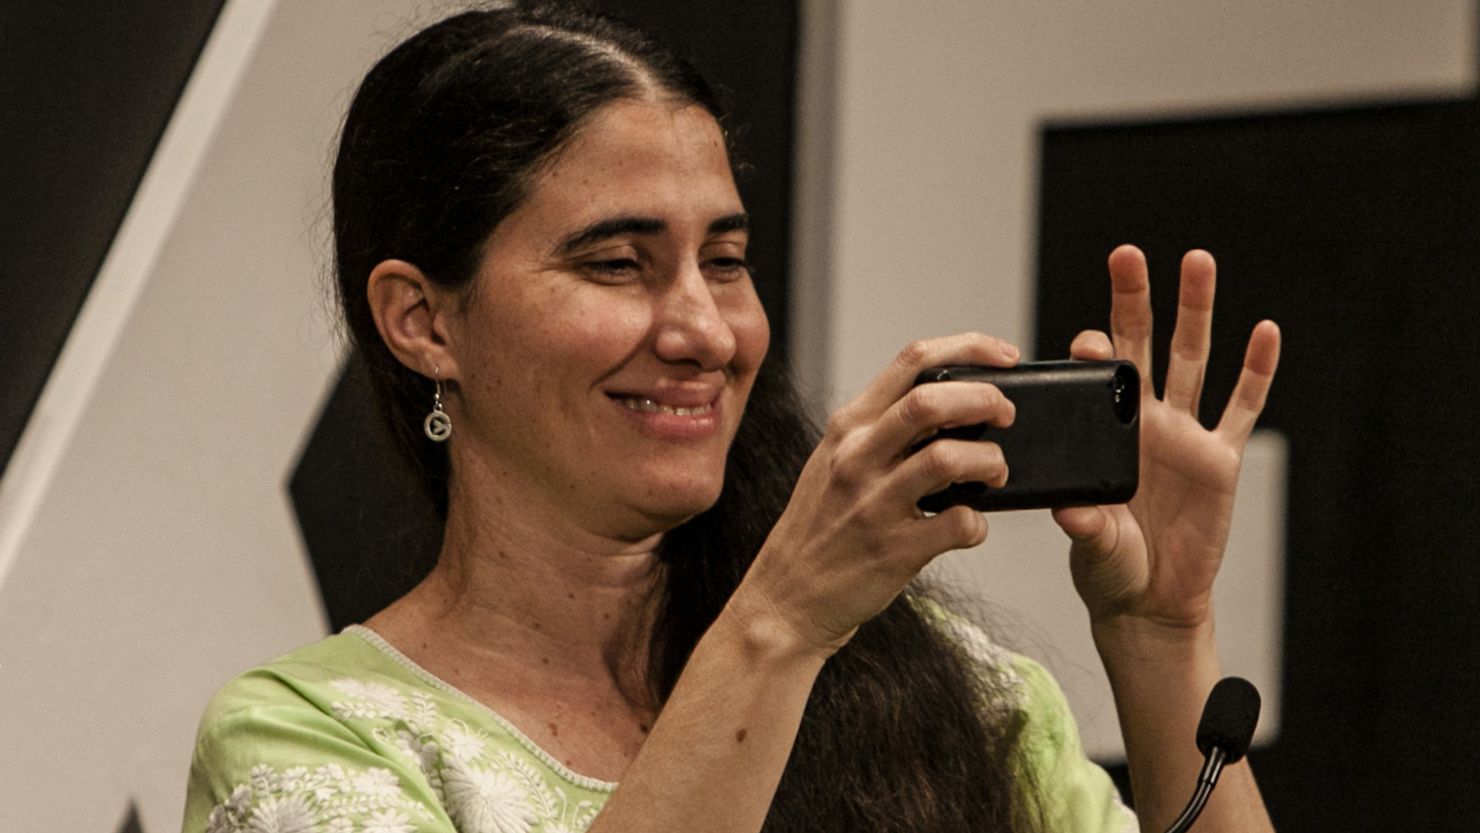 Cuban blogger Yoani Sanchez was among those who met with the Google executives.